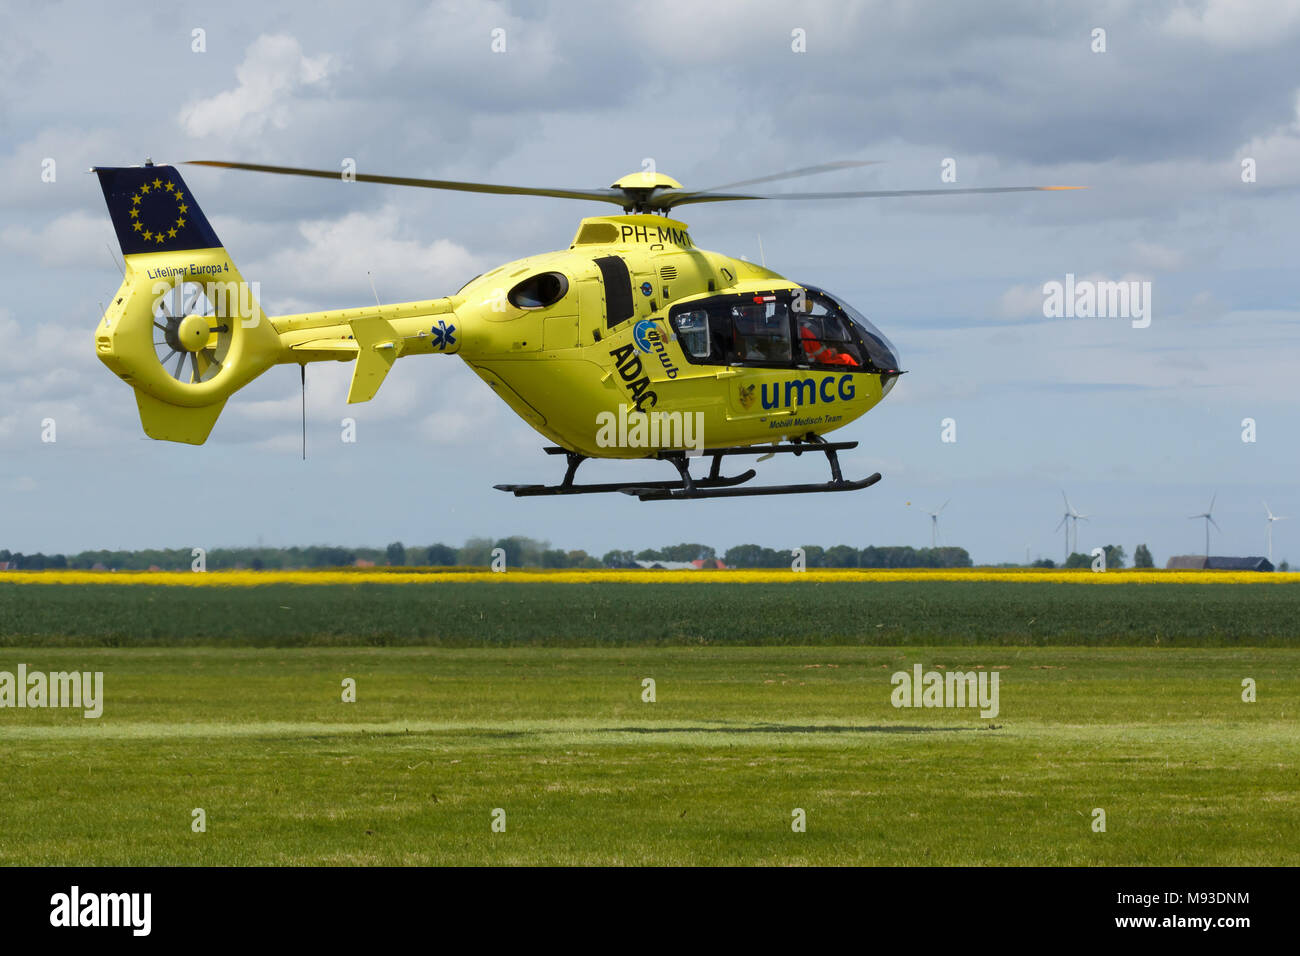 Oostwold, Netherlands May 25, 2015: Lifeliner Air Medical Services landing at Oostwold Airshow Stock Photo